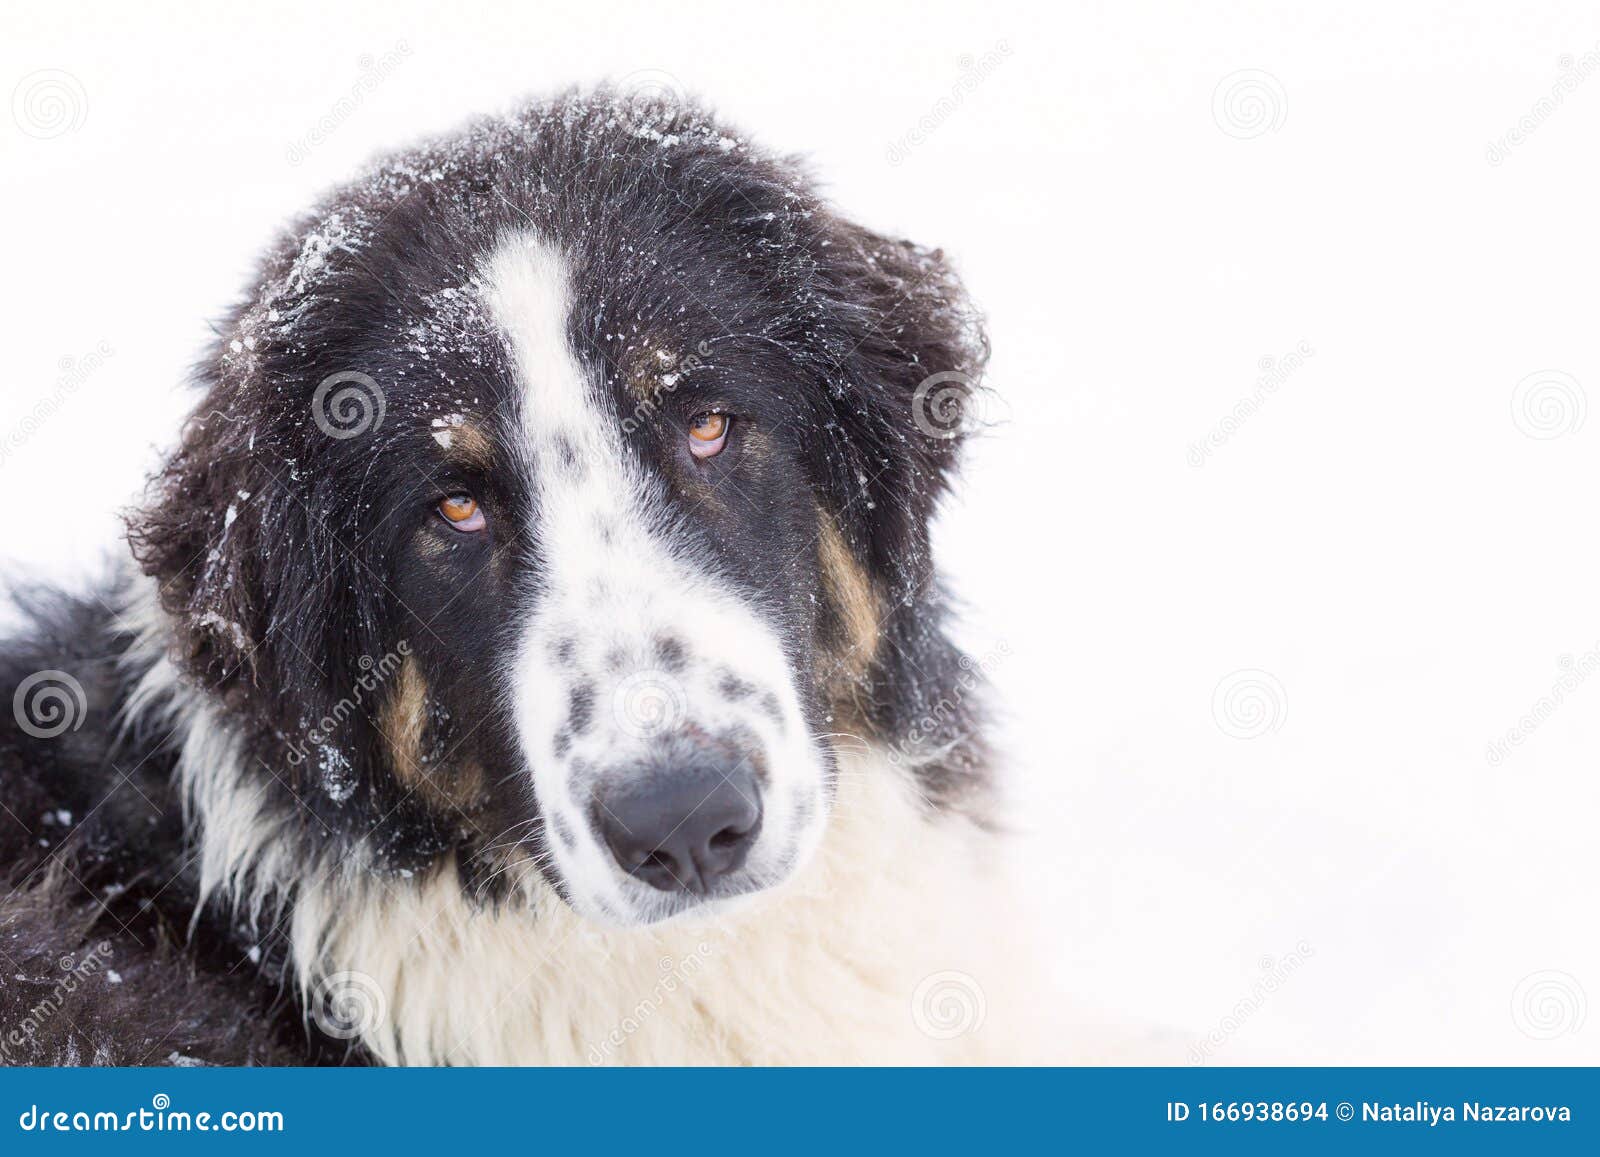 384 Bulgarian Dog Photos Free Royalty Free Stock Photos From Dreamstime